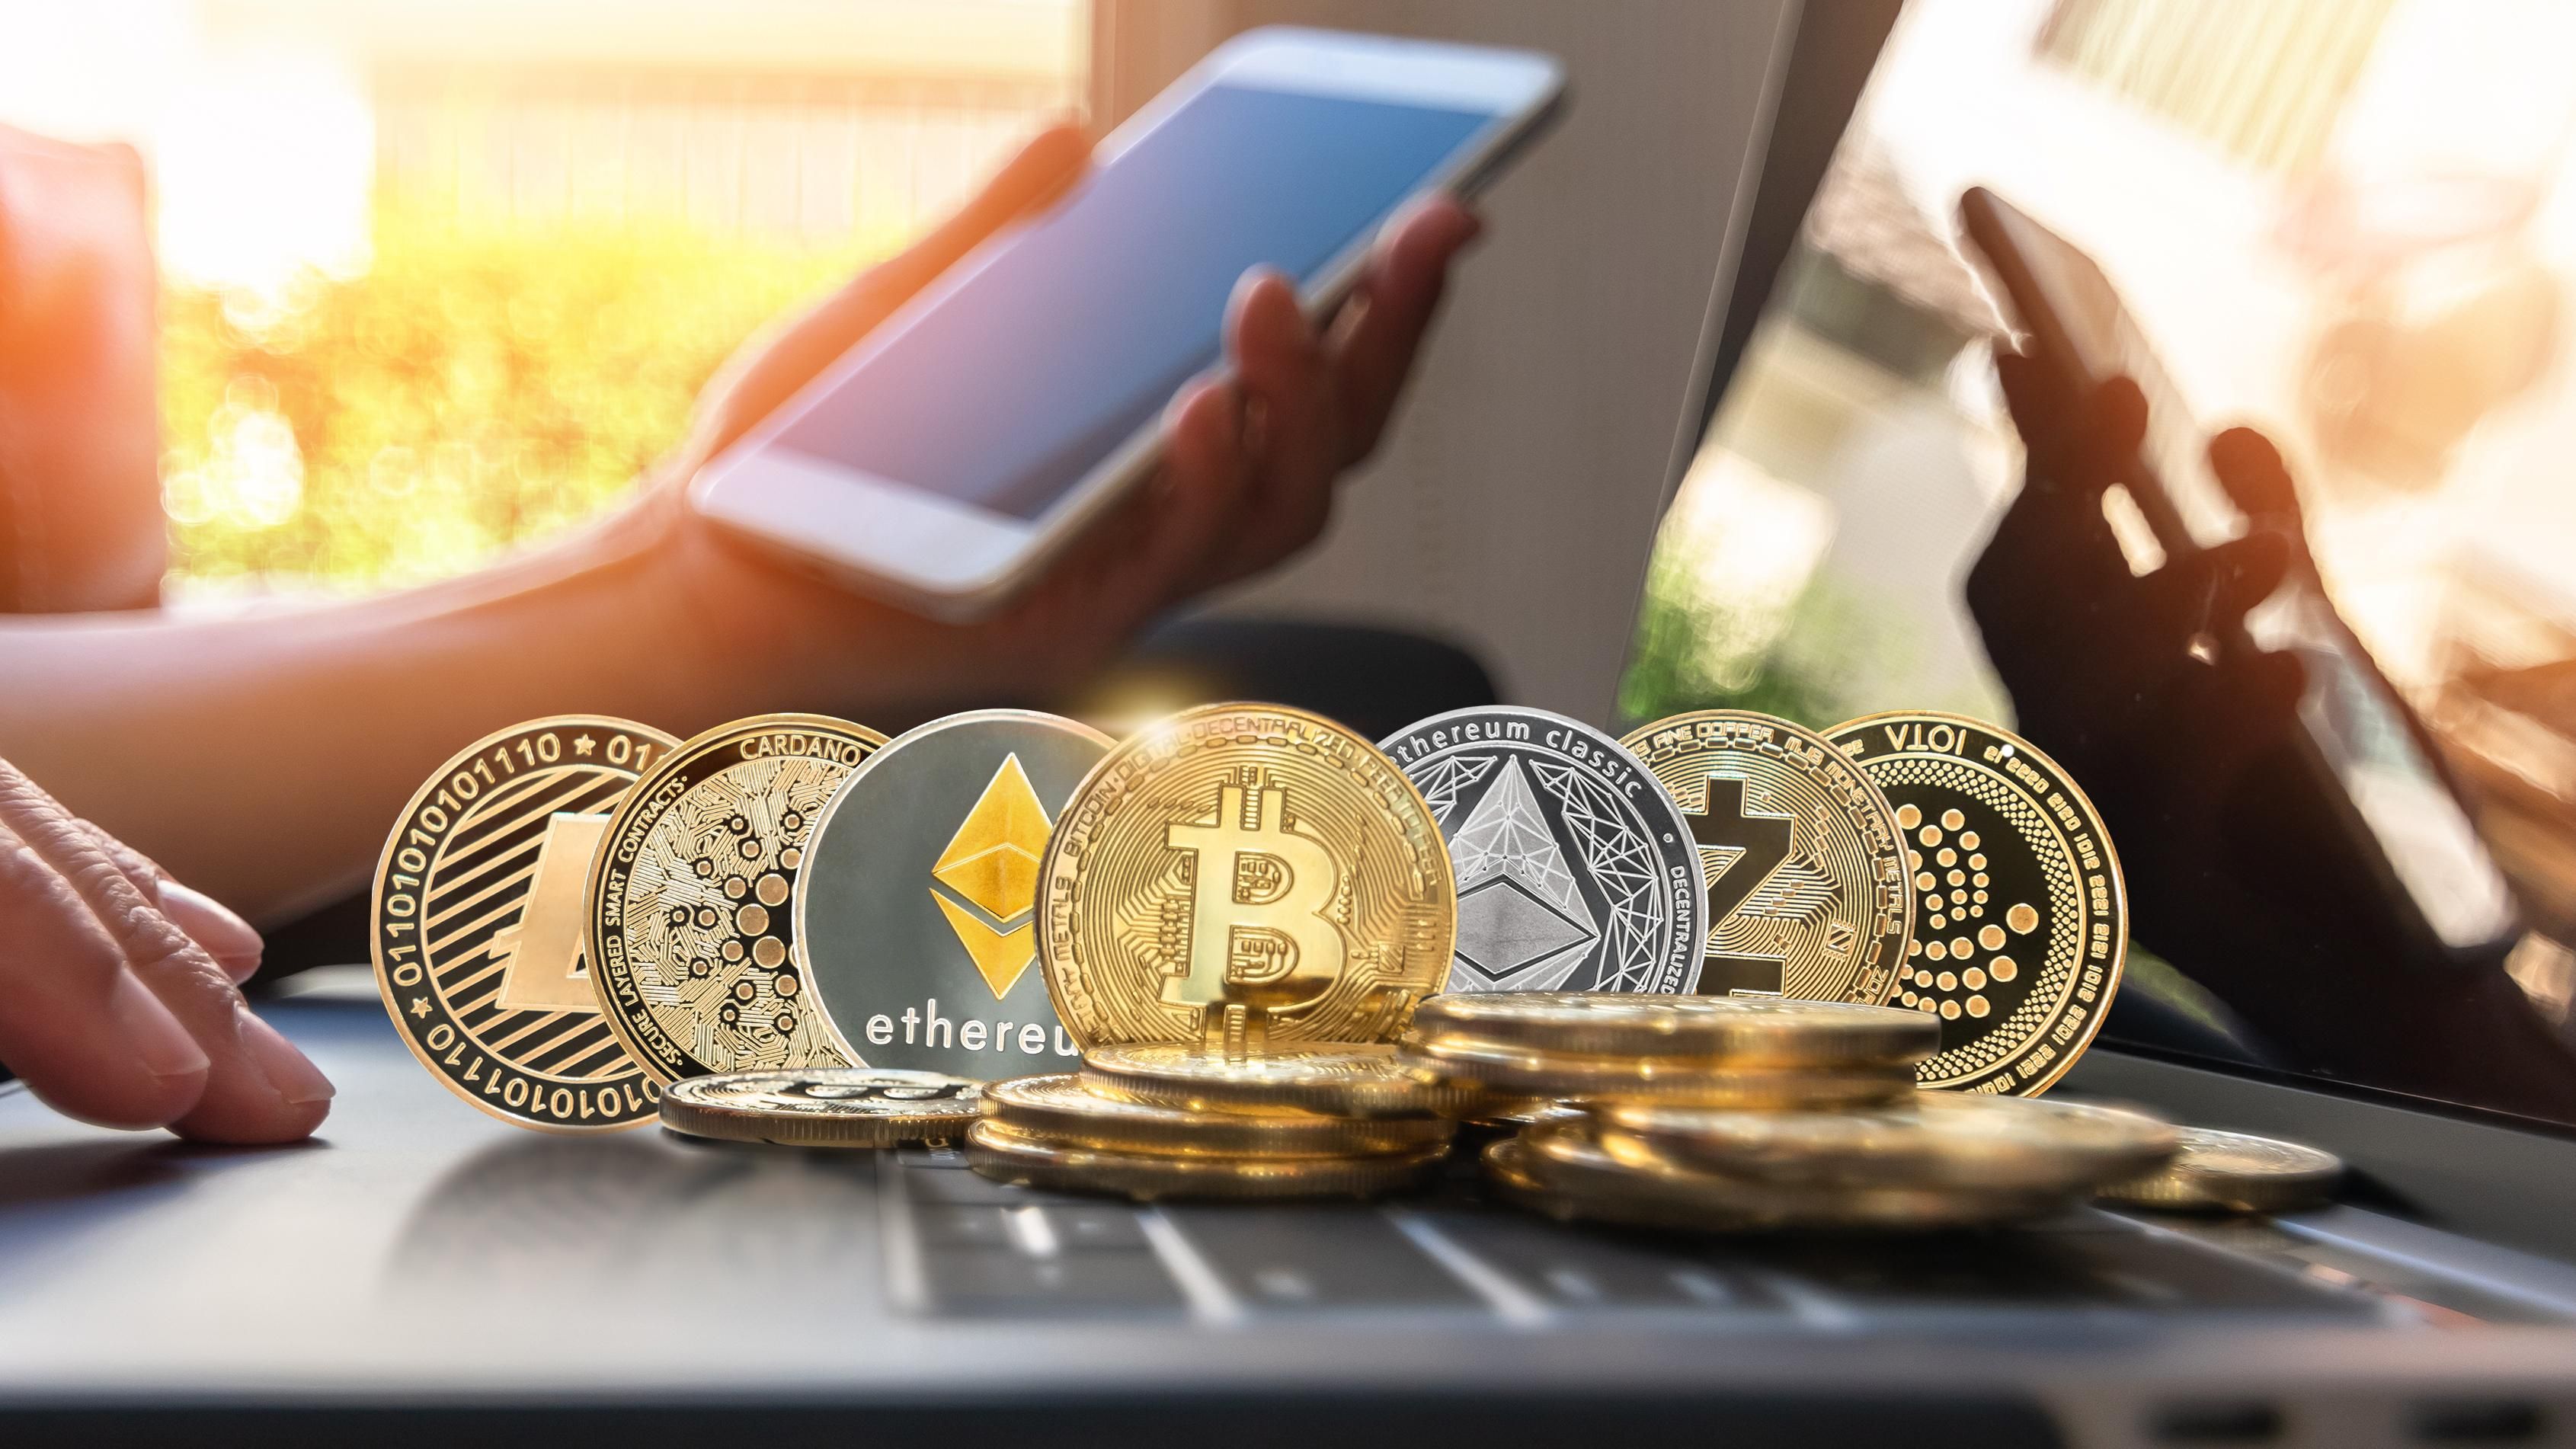 representations of various cryptocurrencies in coin form sitting on a laptop